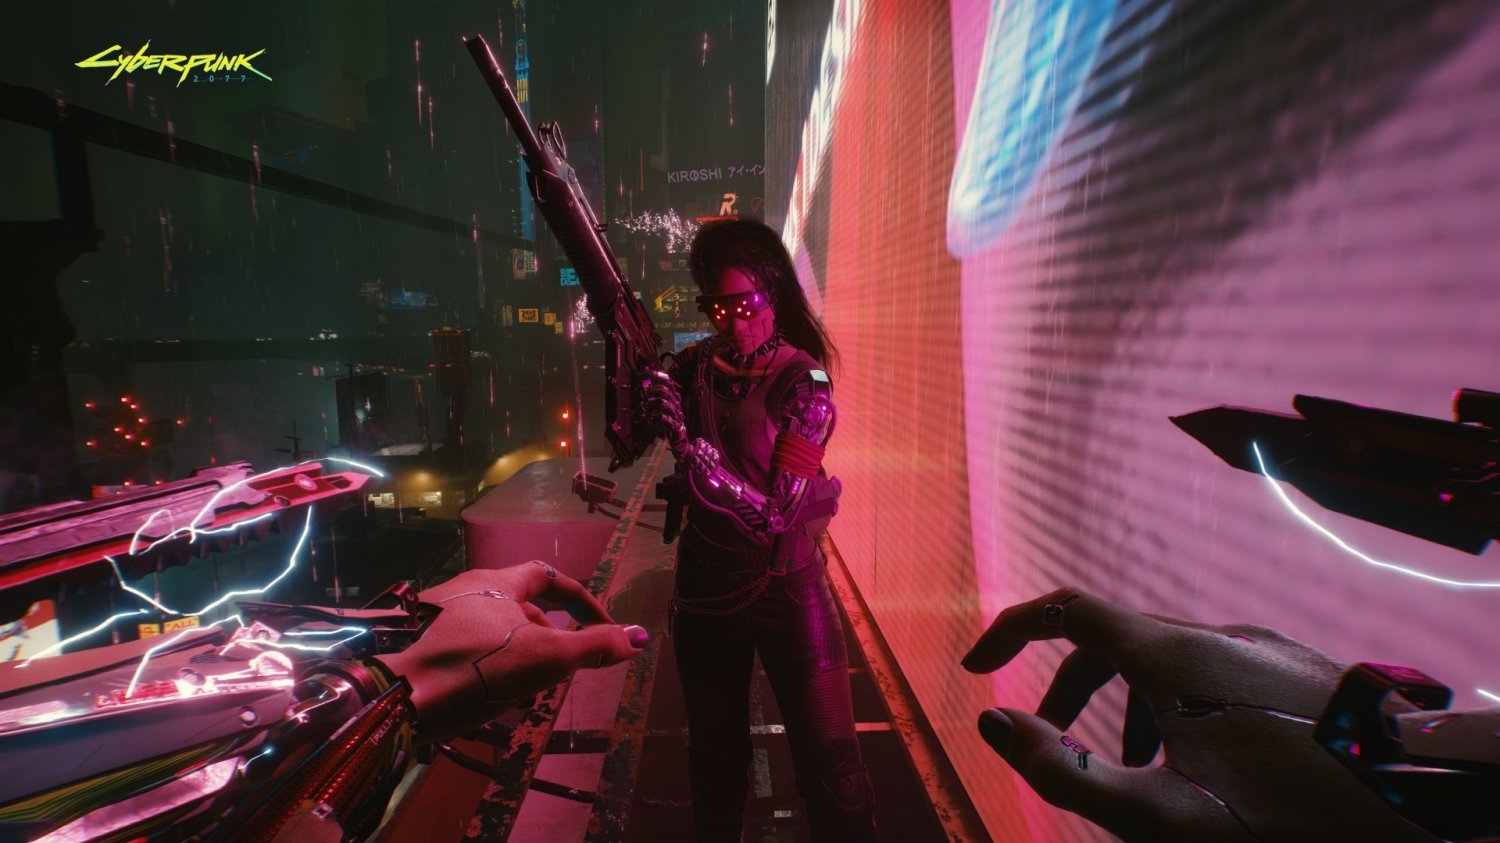 check-out-16-minutes-of-new-cyberpunk-2077-gameplay-footage